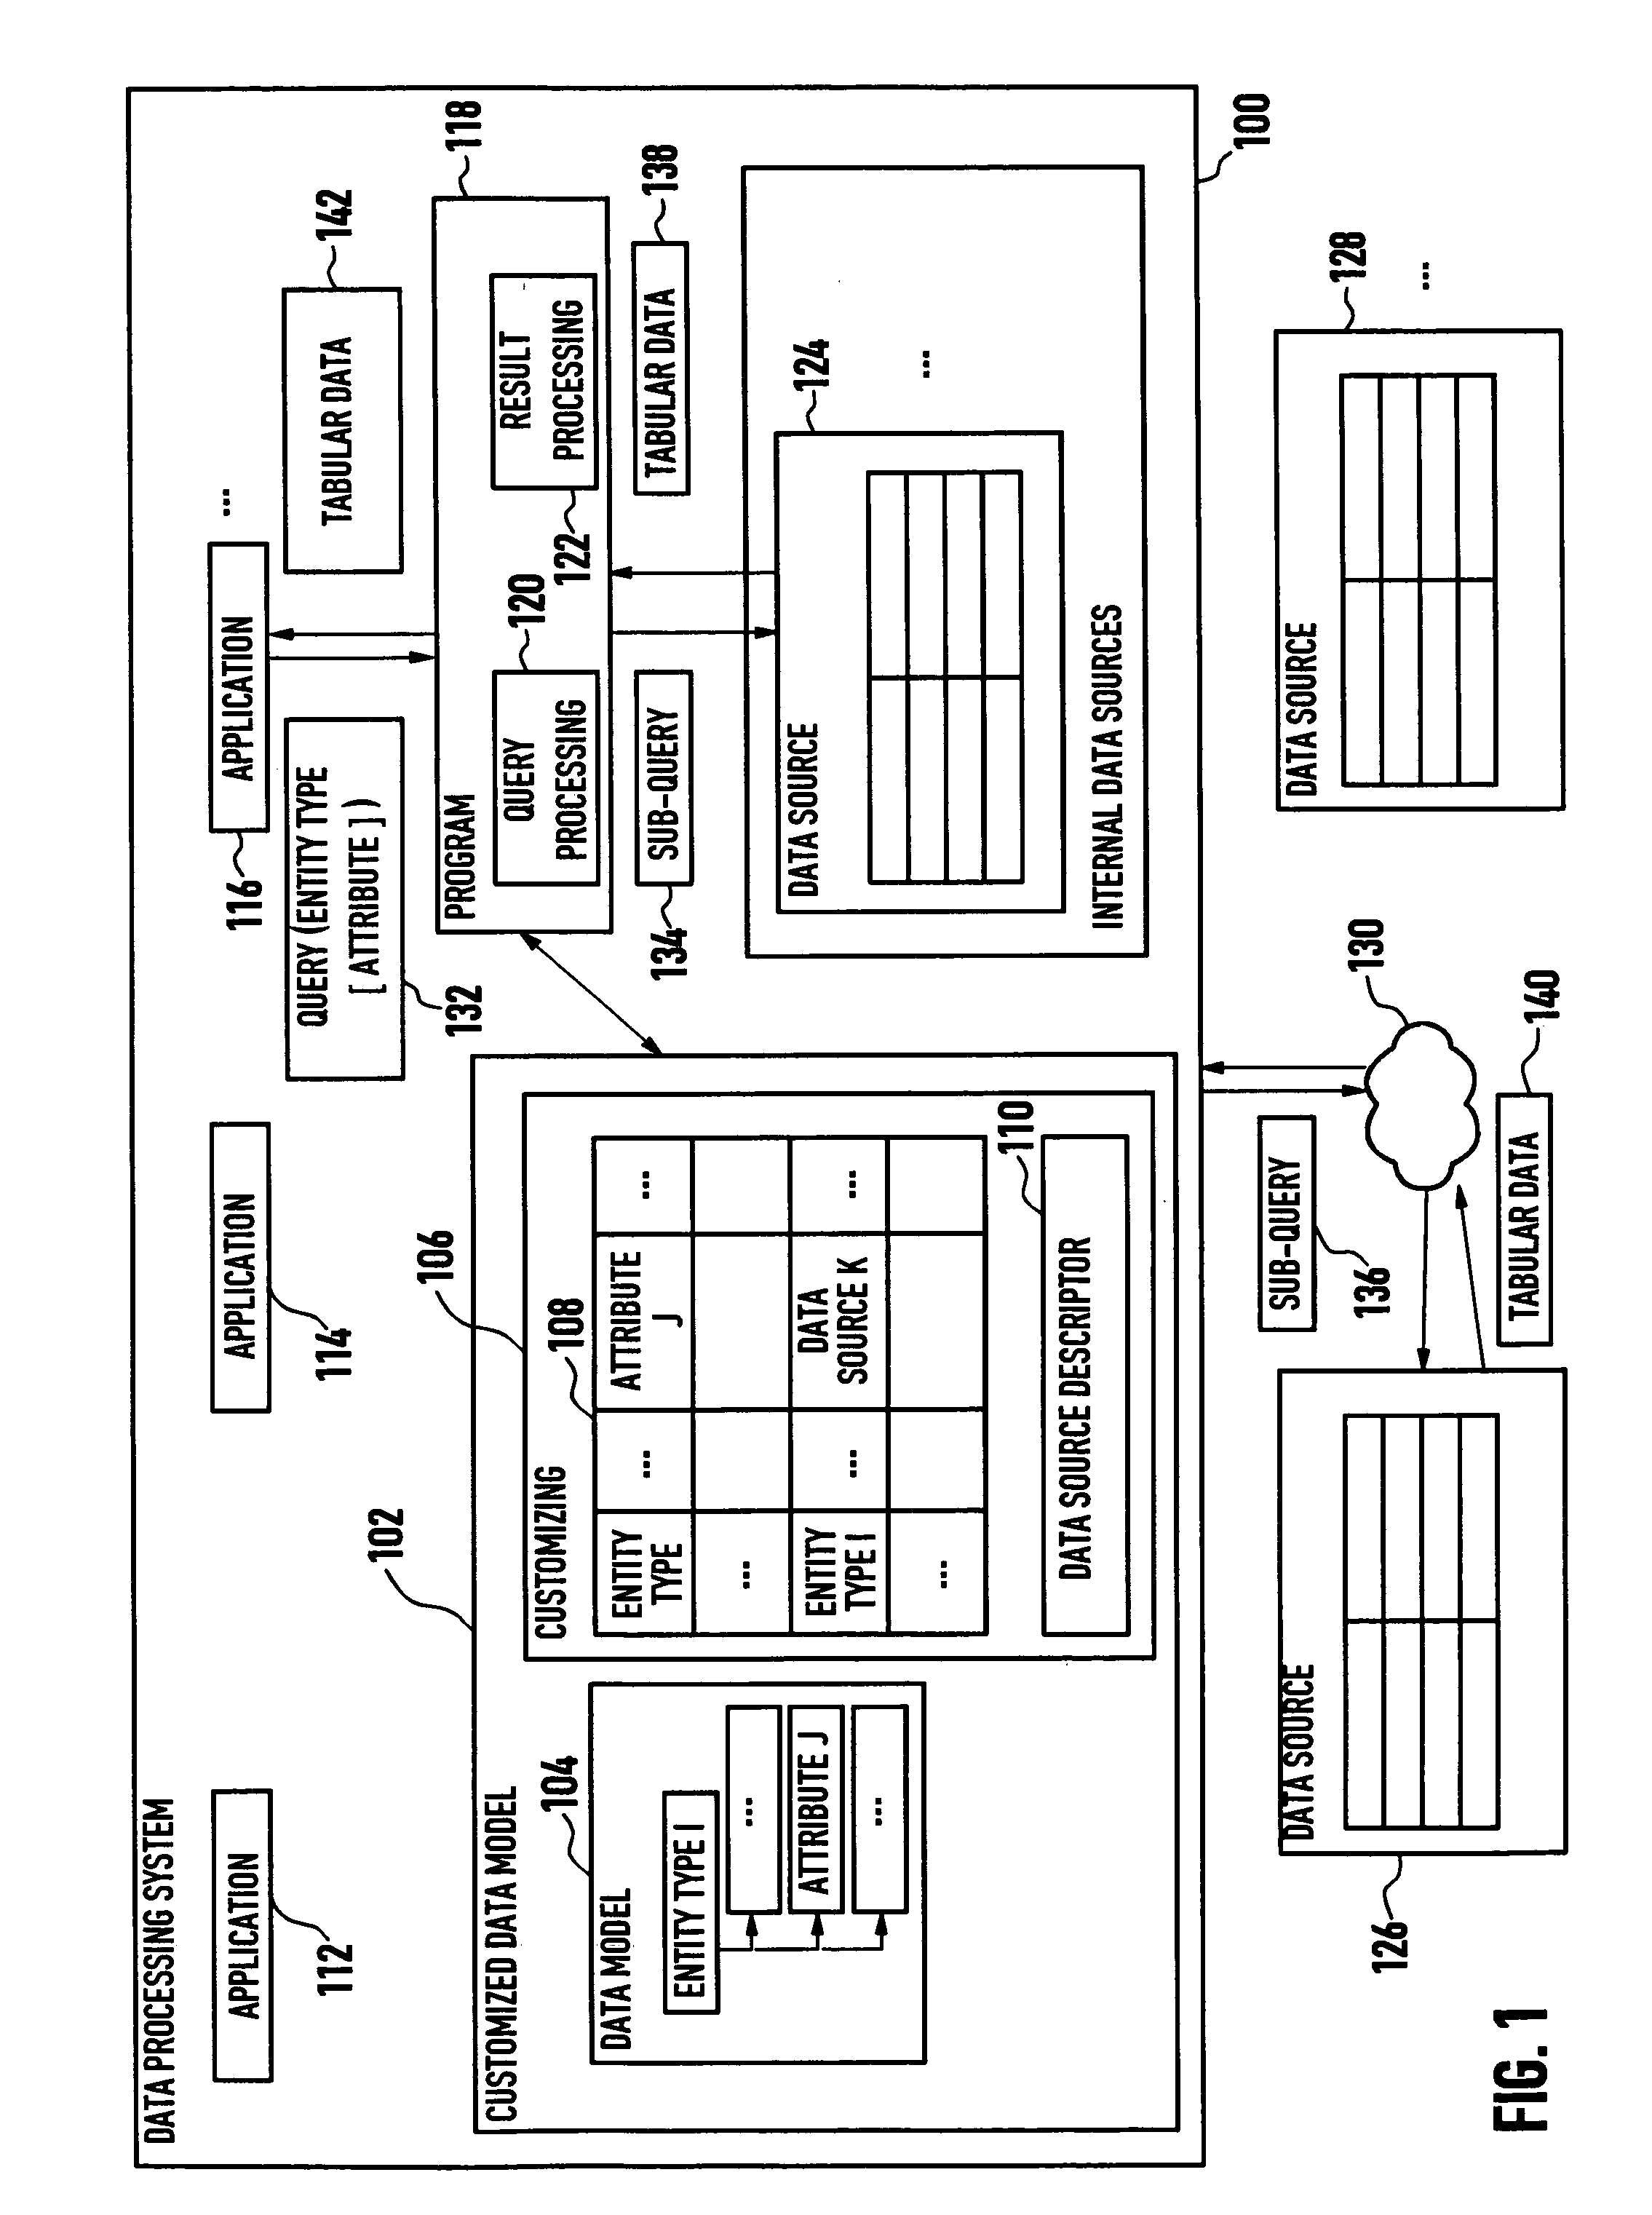 Systems and methods for data processing